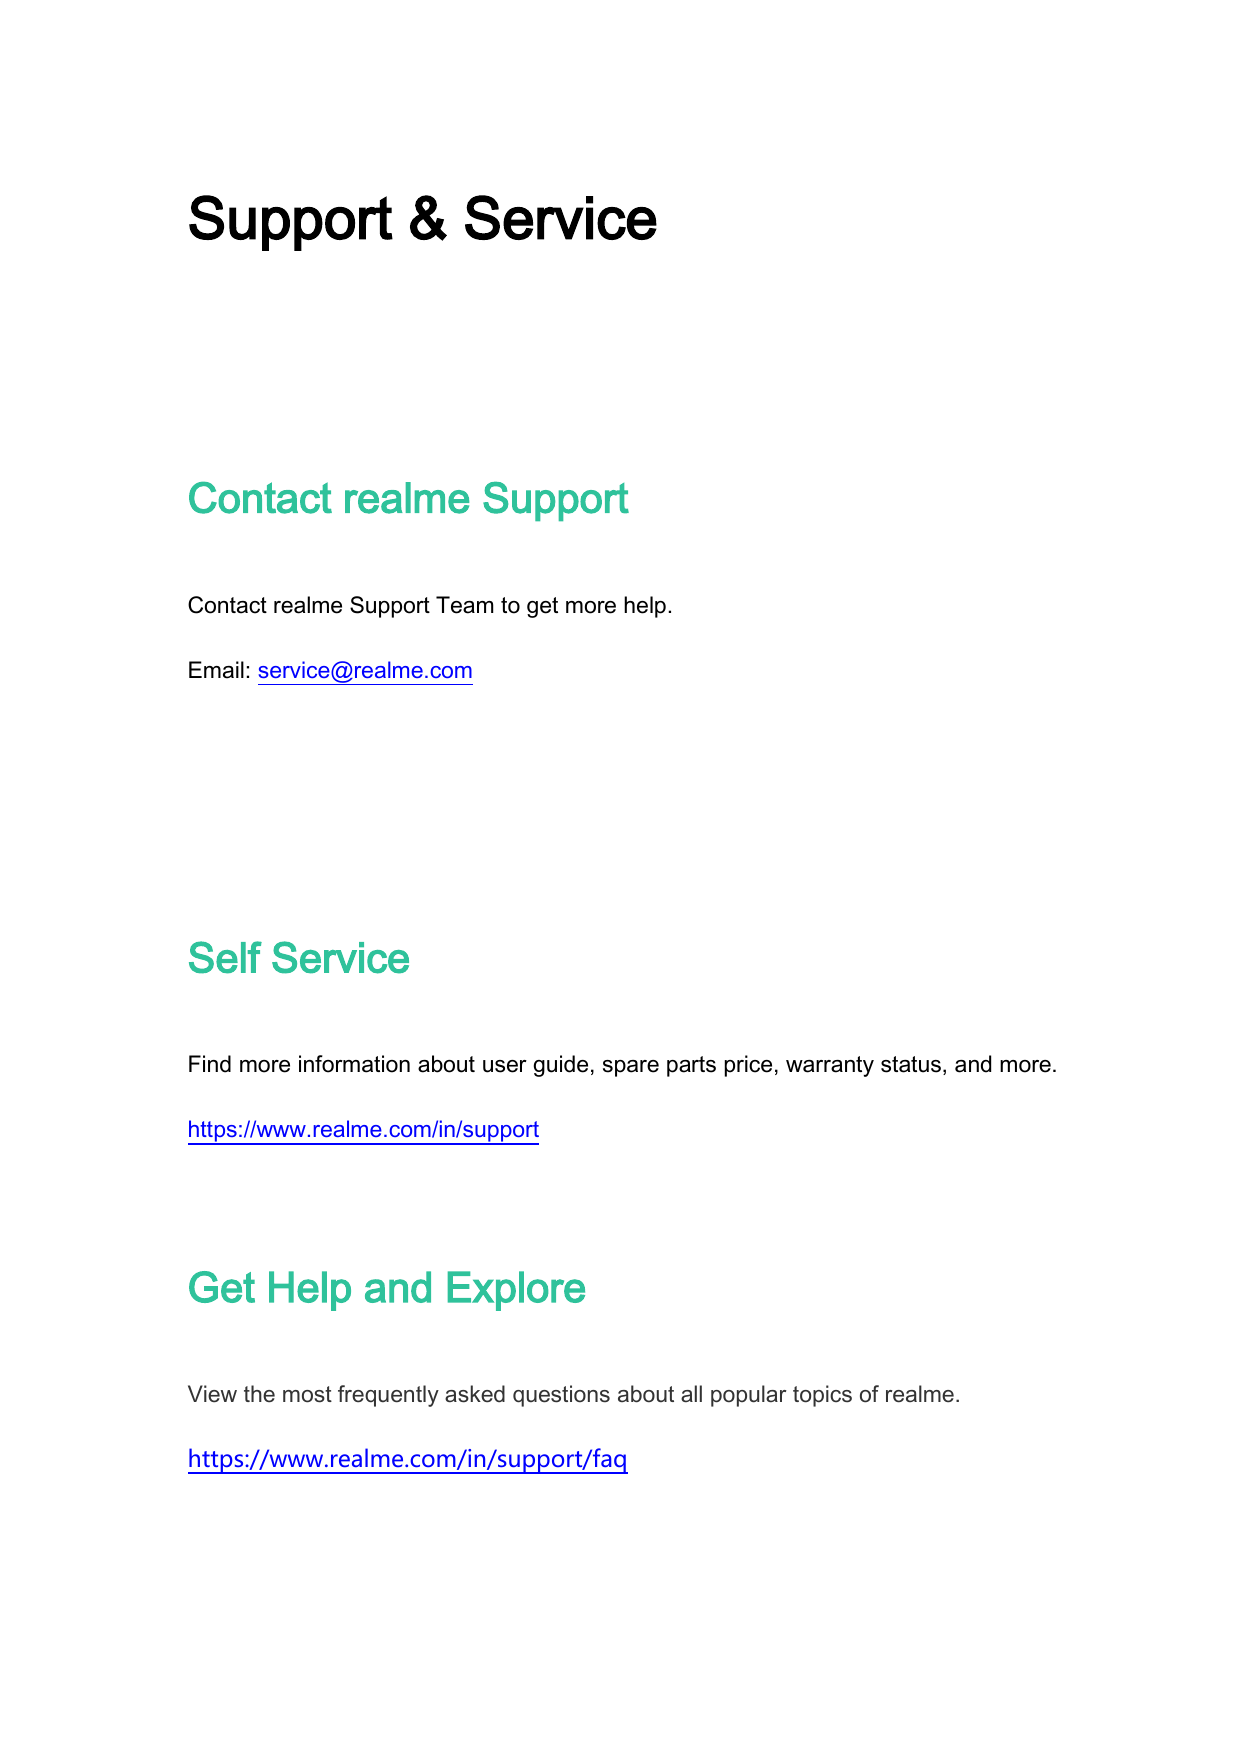 Support & ServiceContact realme SupportContact realme Support Team to get more help.Email: service@realme.comSelf ServiceFind mo